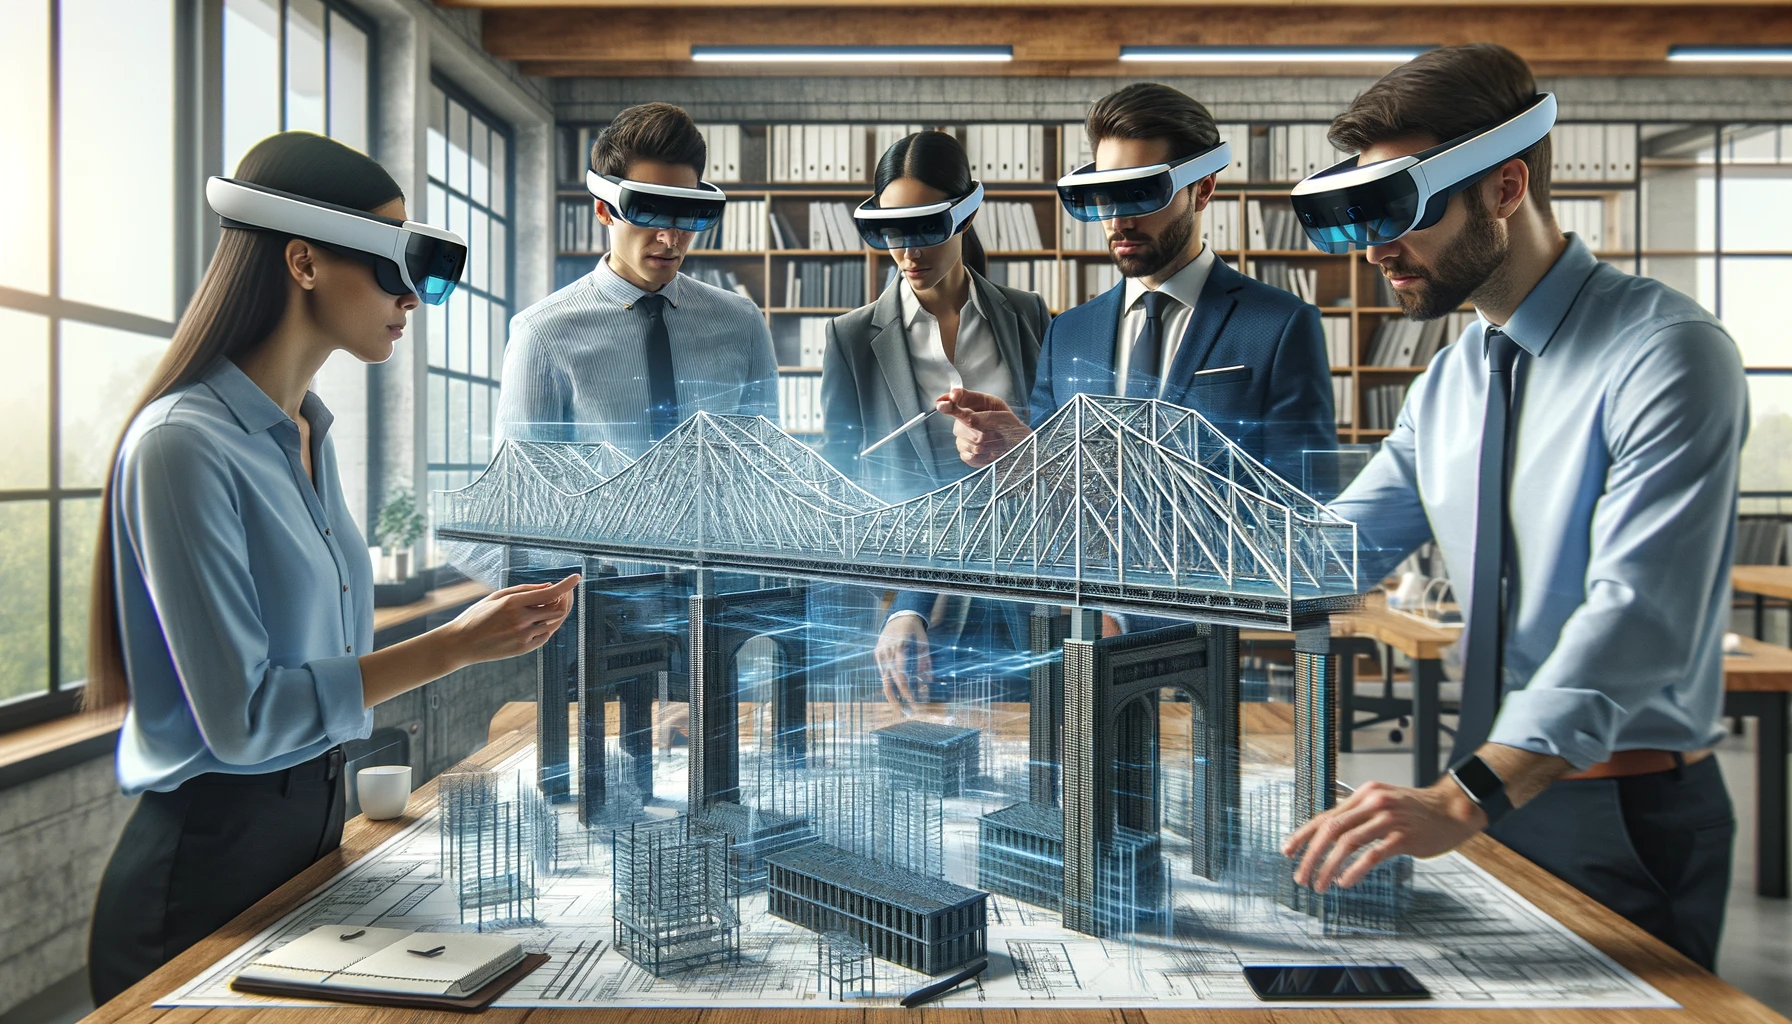 Engineers using augmented reality to visualize and interact with a complex bridge design in a modern office environment. The image shows a diverse team of engineers examining a detailed holographic model of the bridge that appears to float in the center of the room.